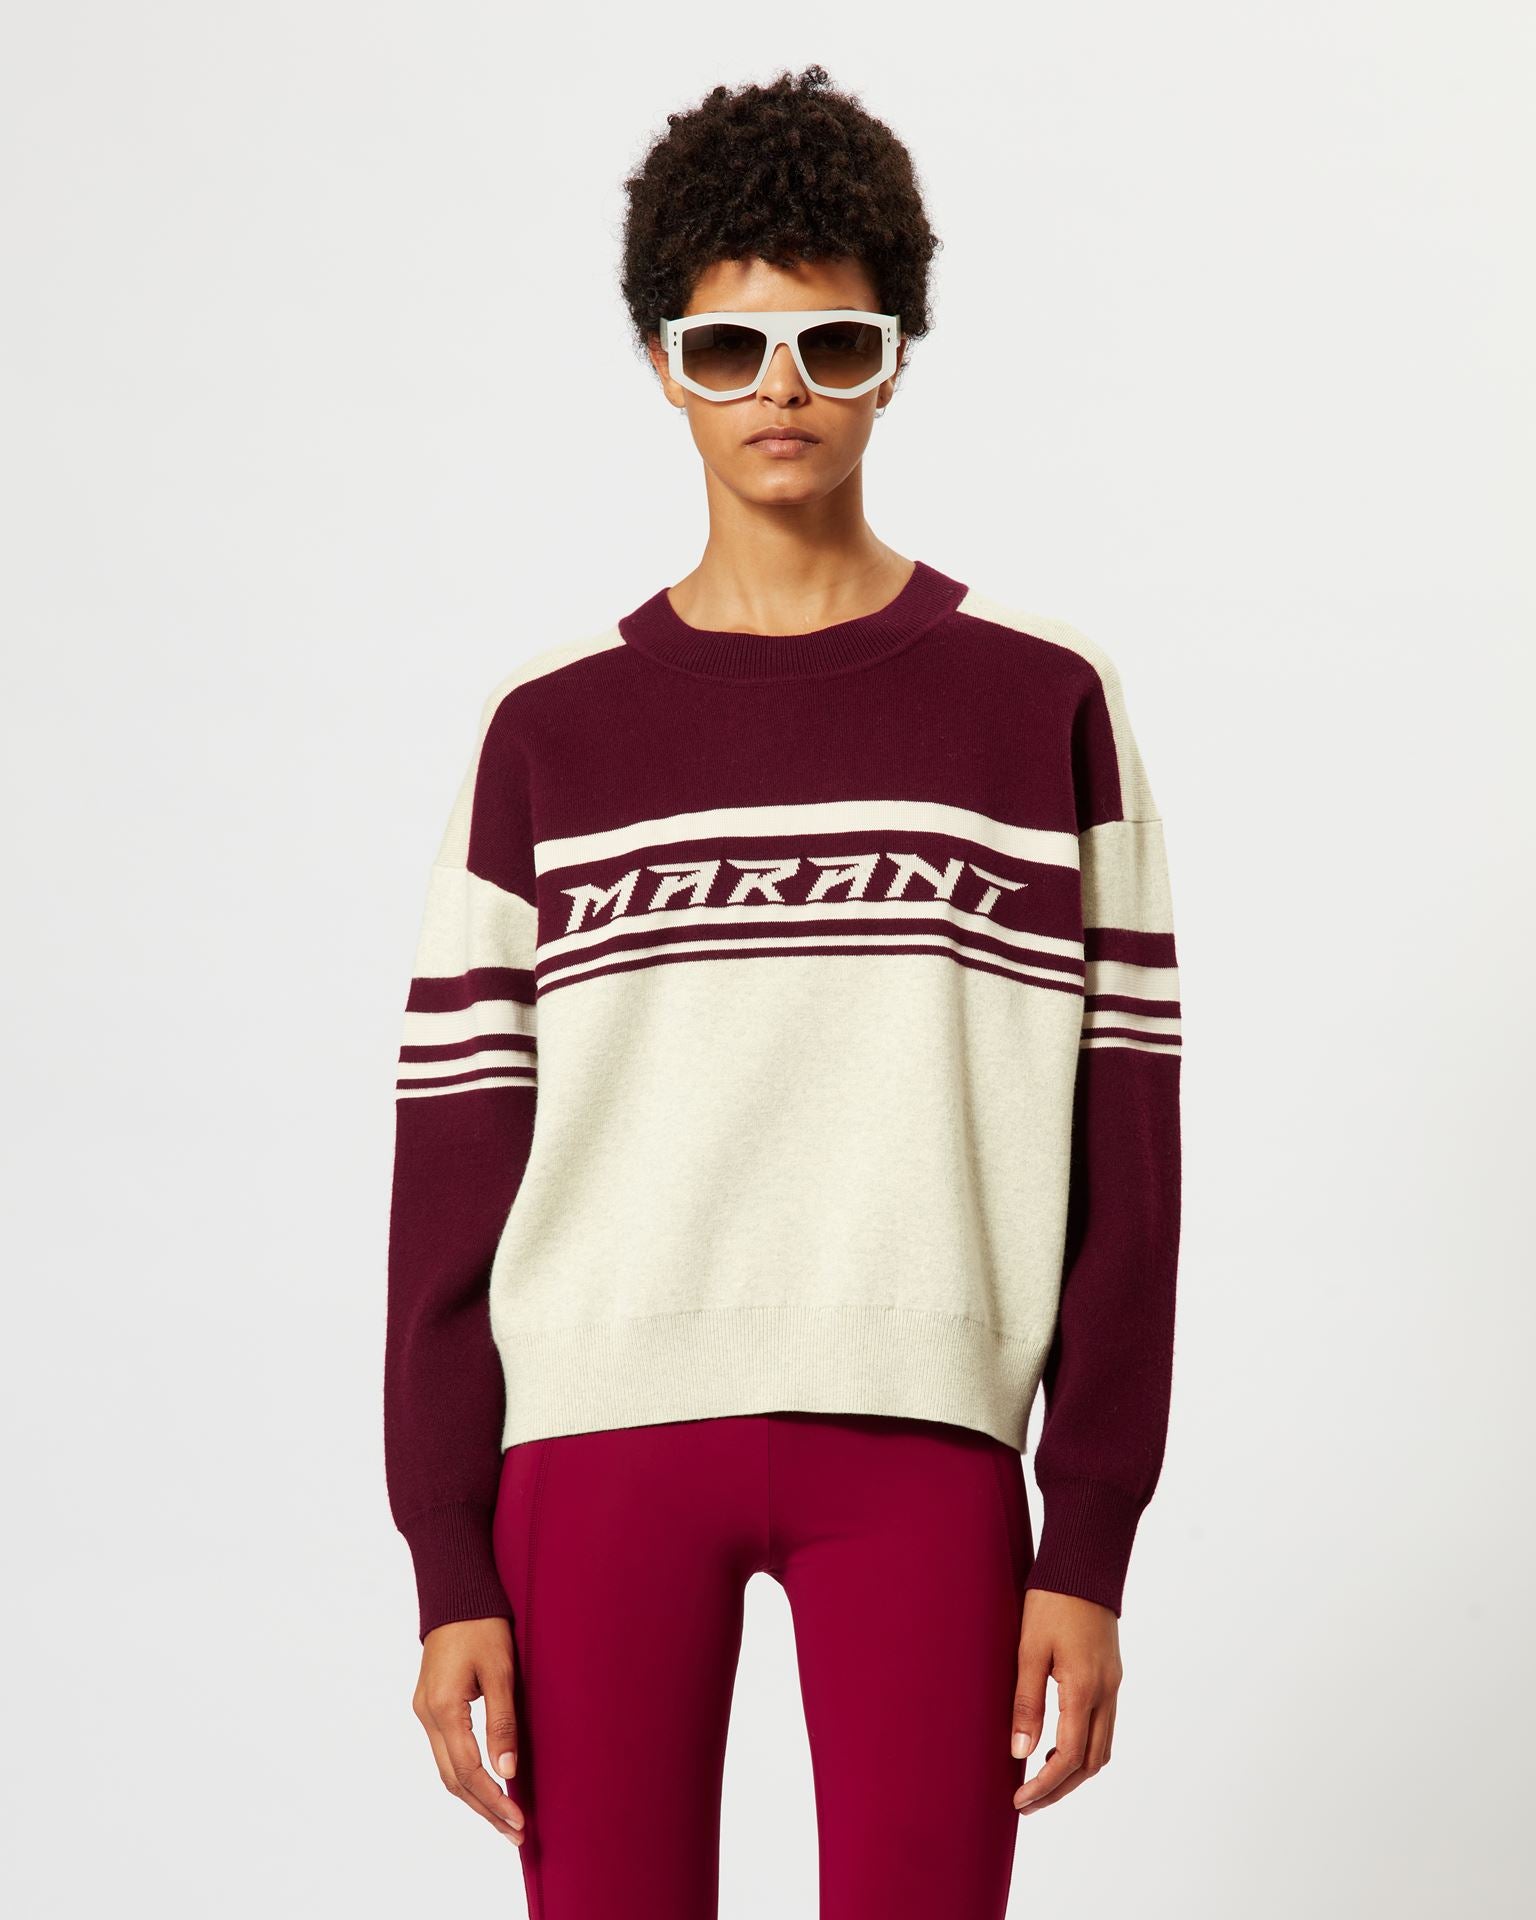 The Isabel Marant Callie Pullover in Dark Plum available at The New Trend Australia